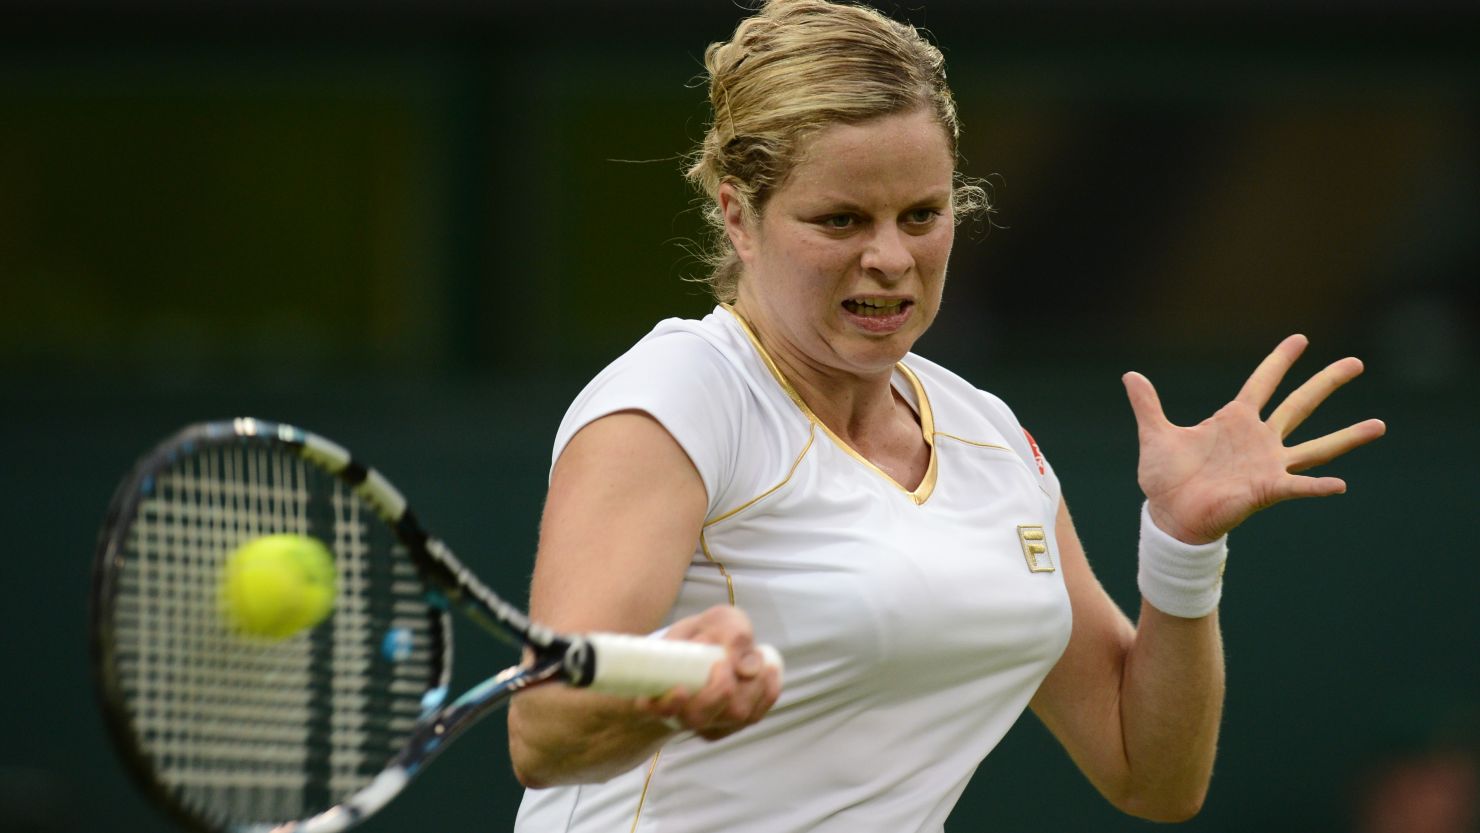 Kim Clijsters reached the quarterfinals of her first Olympic tournament at the recent London Games.